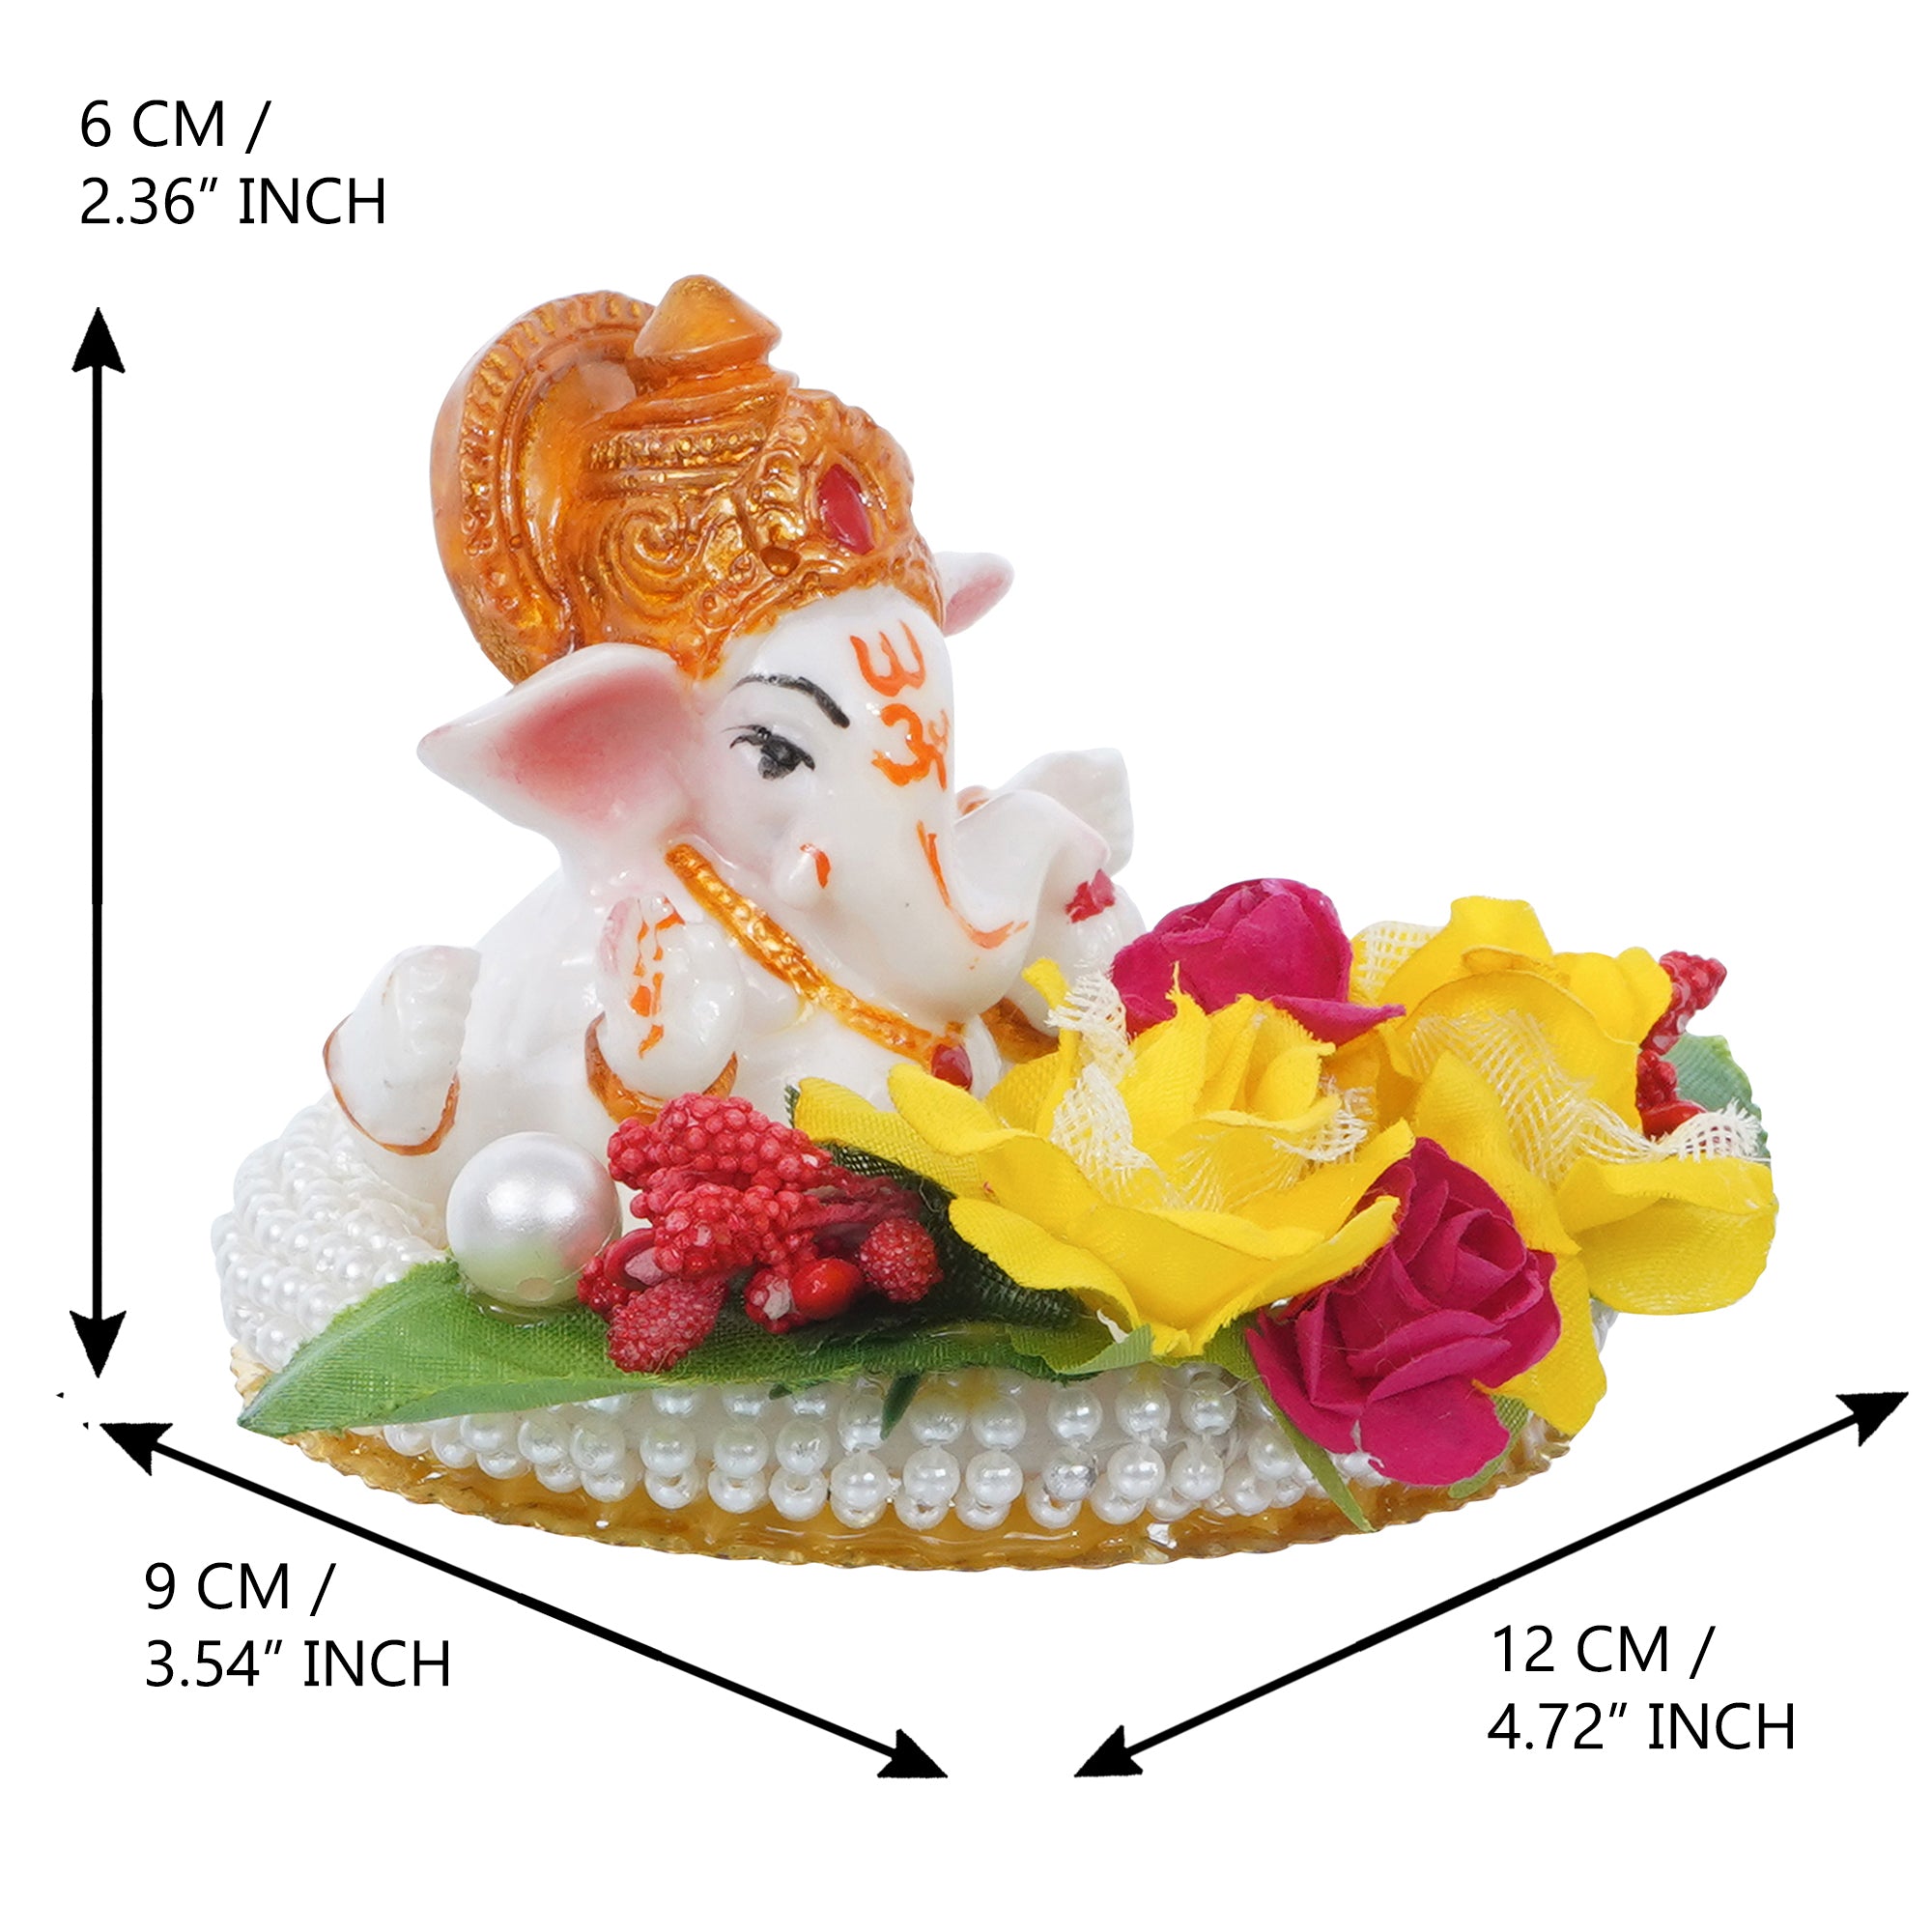 Lord Ganesha Idol on Decorative Handcrafted Plate with Colorful Flowers and Leaf 3